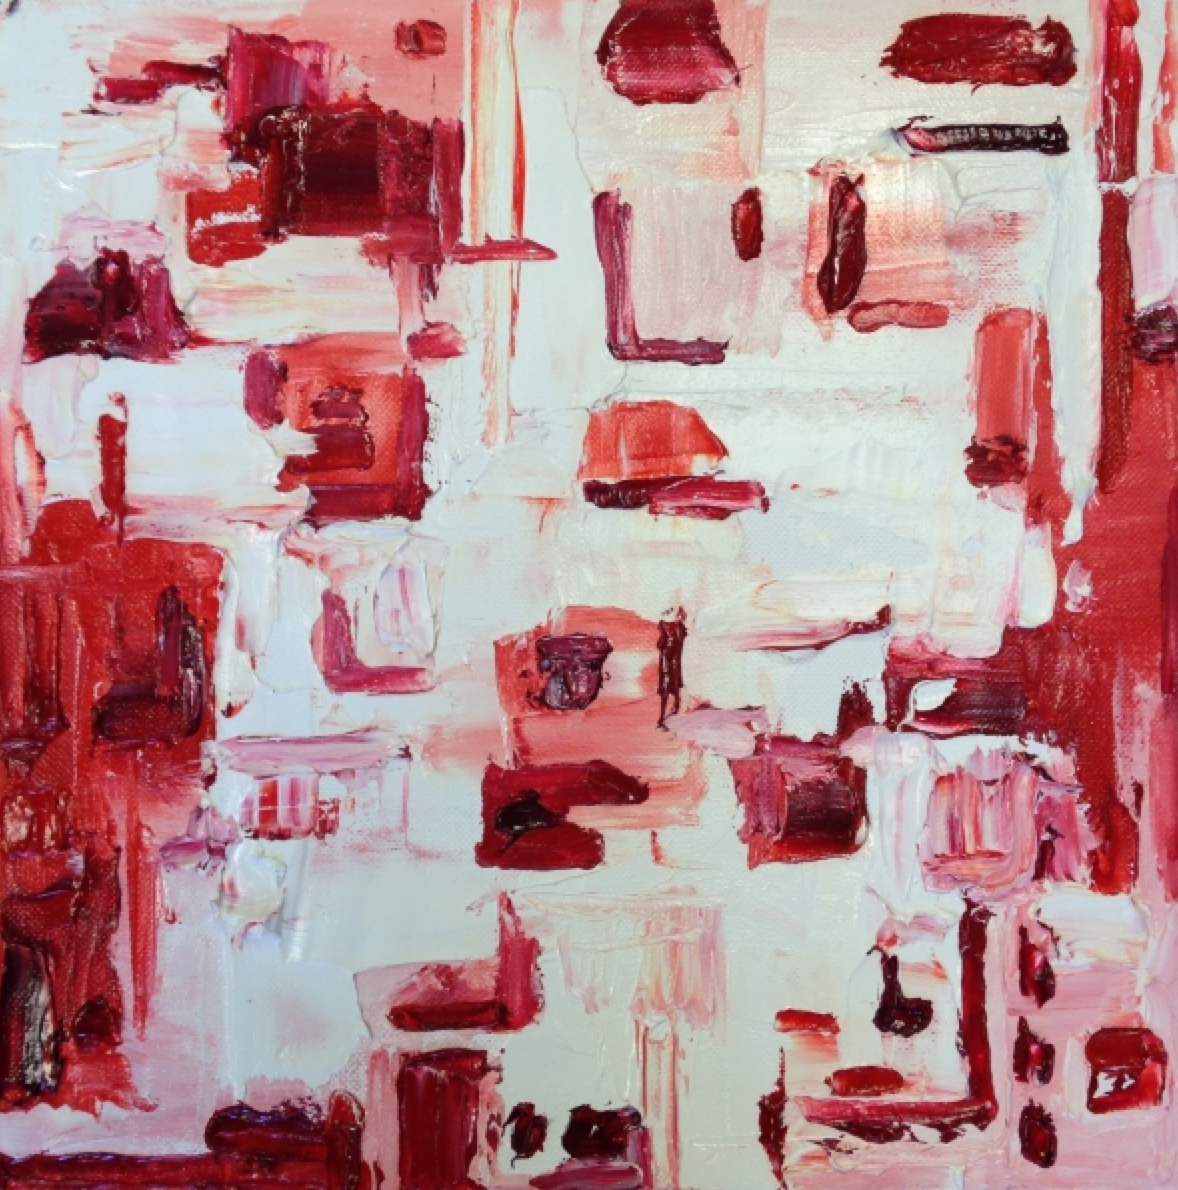  # 20  White and Red Abstract  by Jodie Maurer  12" x 12" | Oil | $265.00     Status: Available  Current Location:  C. Parker Gallery  